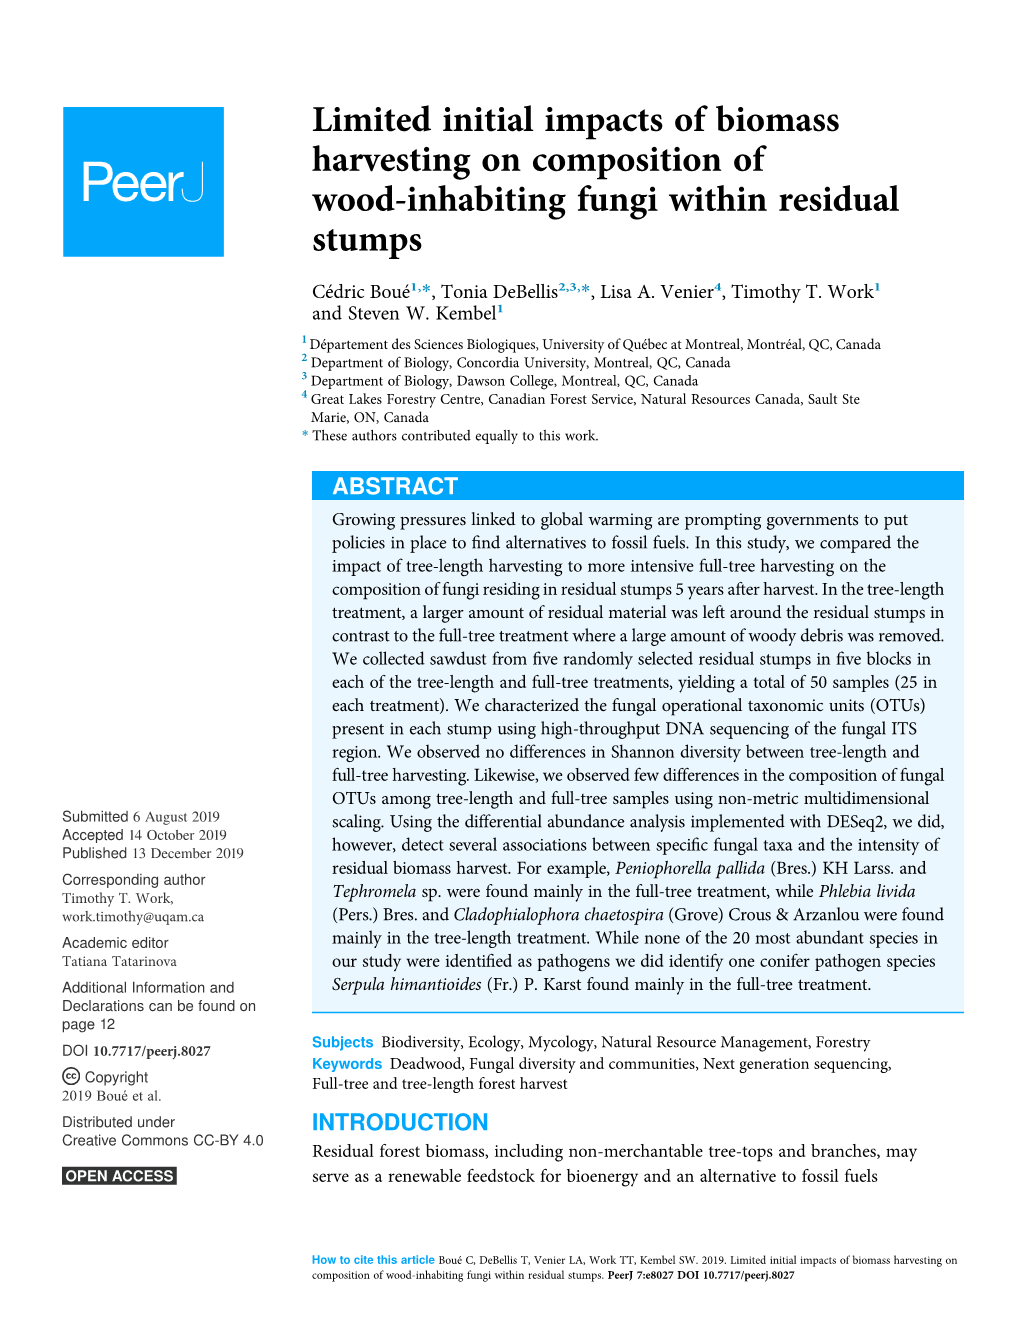 Limited Initial Impacts of Biomass Harvesting on Composition of Wood-Inhabiting Fungi Within Residual Stumps